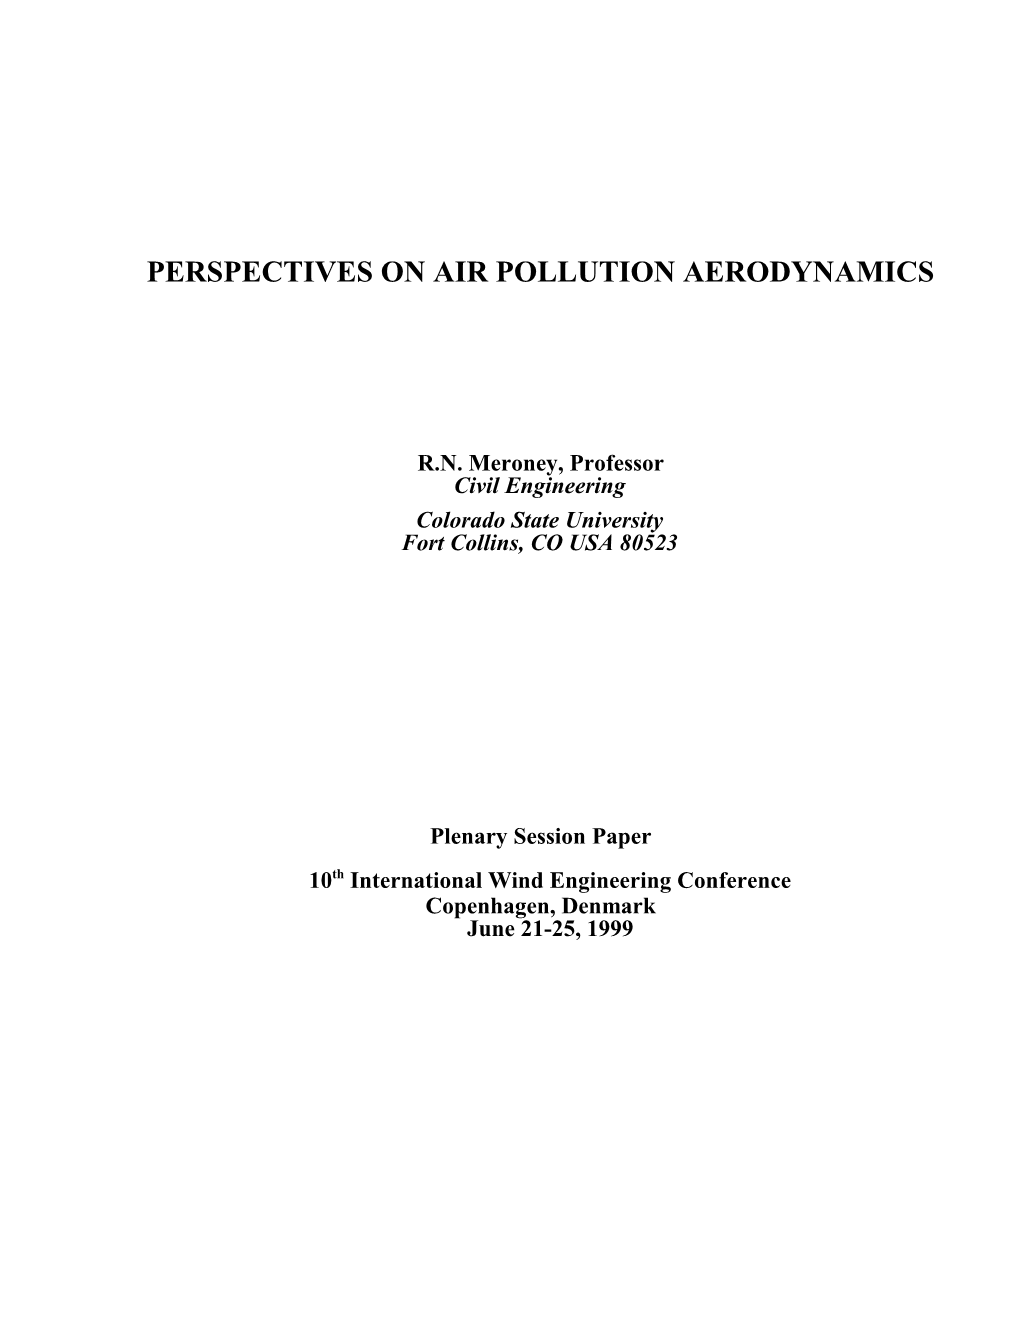 Perspectives on Air Pollution Aerodynamics